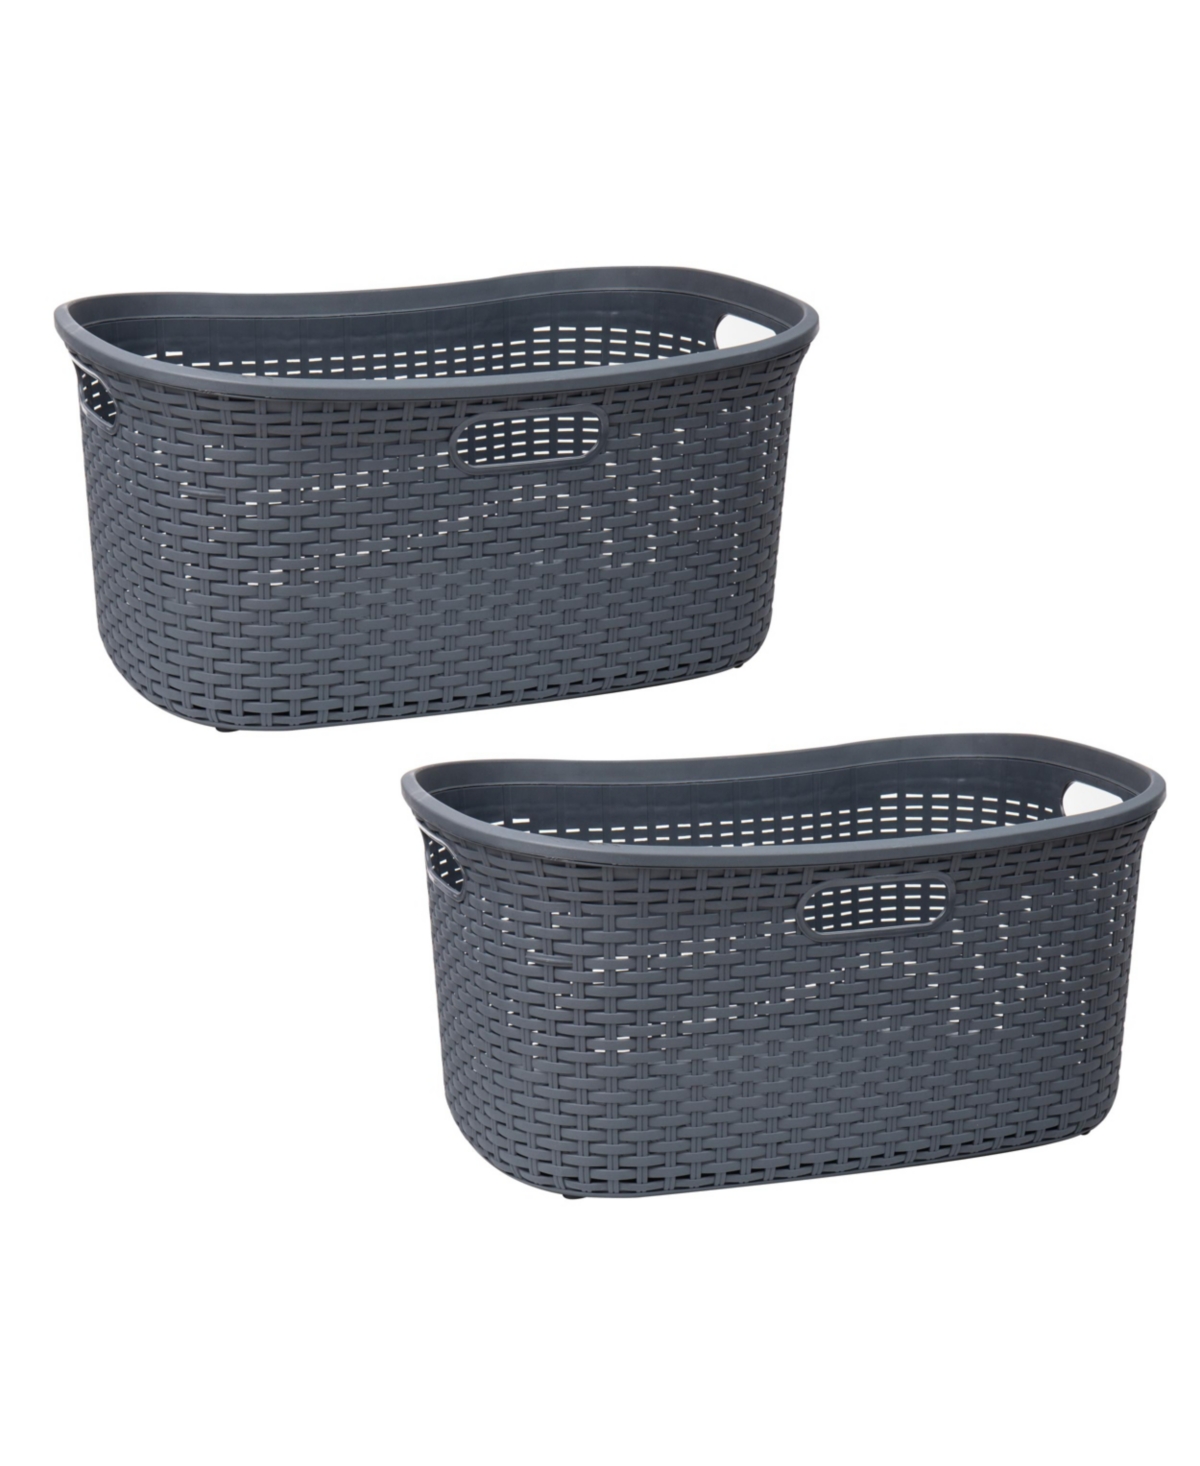 Basket Collection Laundry Basket, Cut Out Handles, Ventilated, Set of 2 - Gray